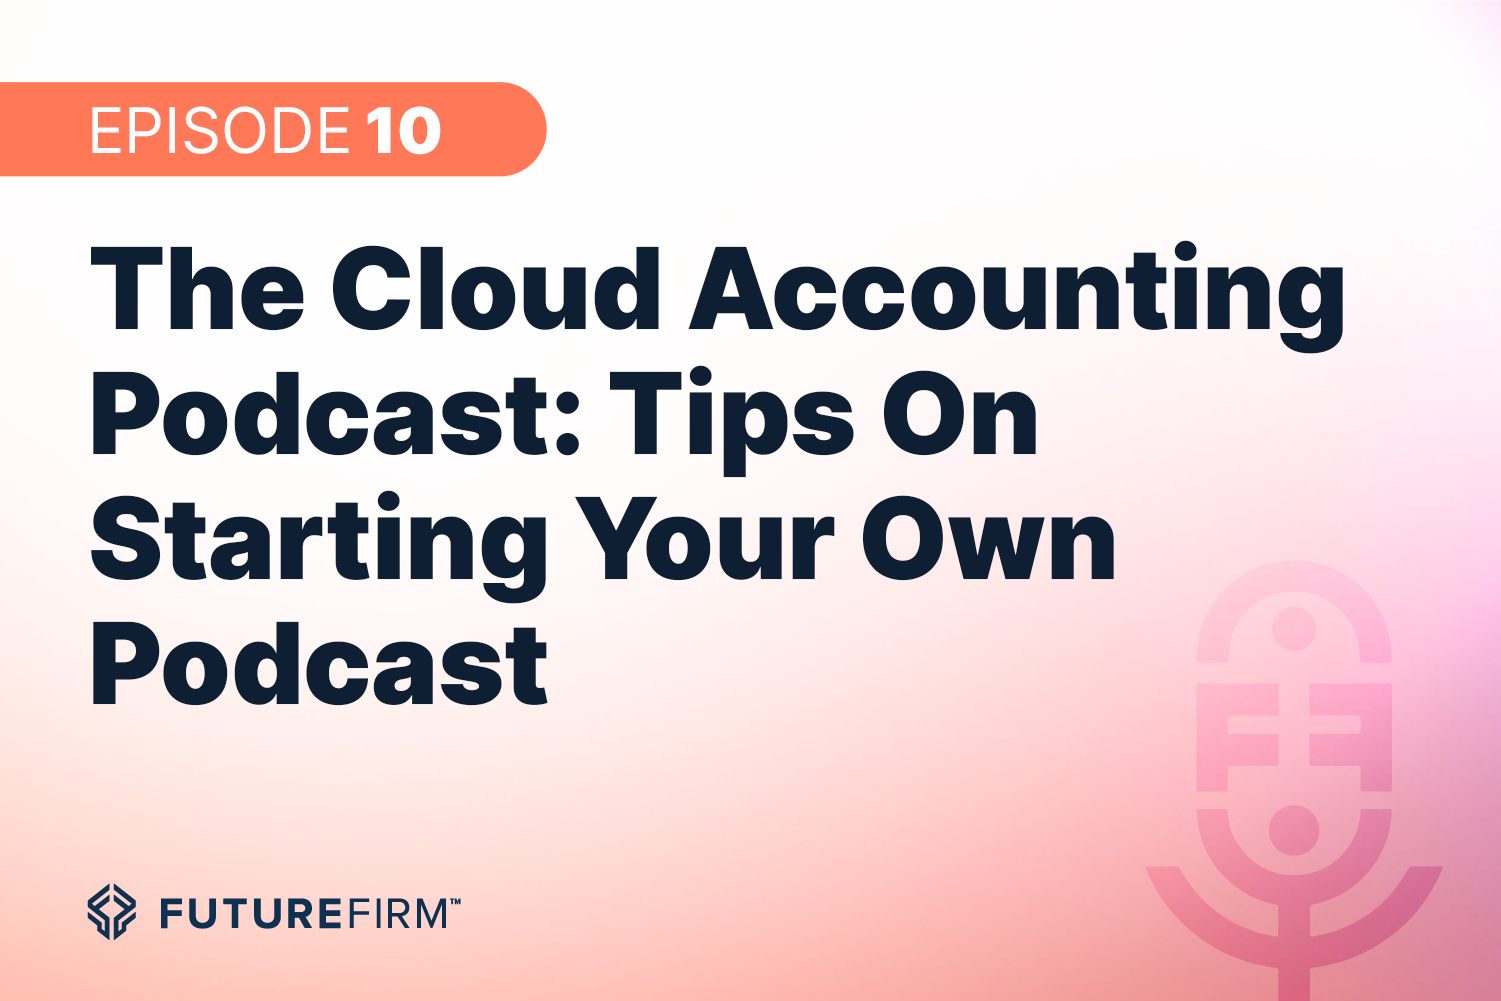 The Cloud Accounting Podcast: Tips On Starting Your Own Podcast